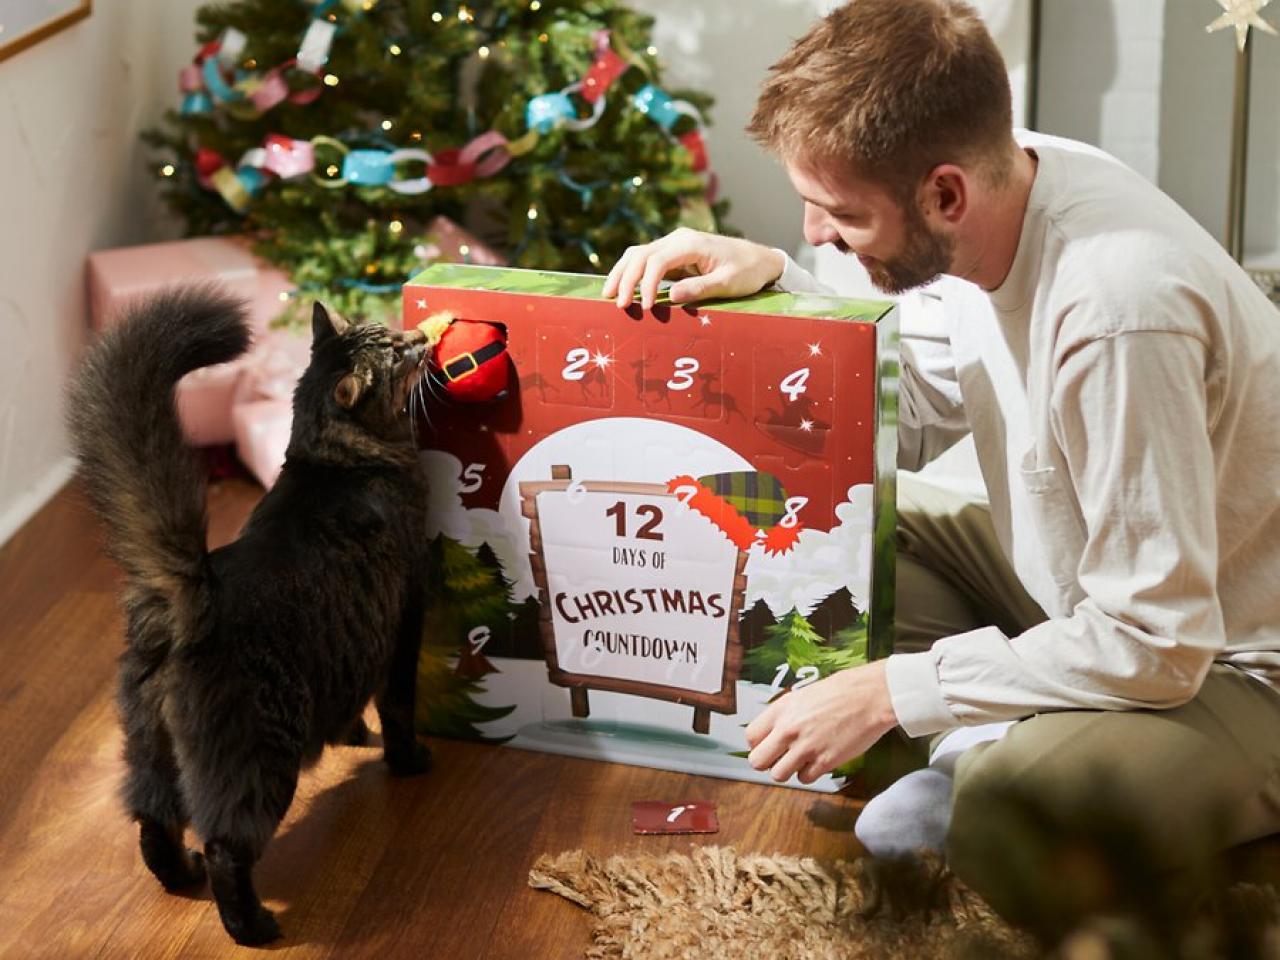 The 12 Best Holiday Pet Gifts For Dogs, Cats, and More!